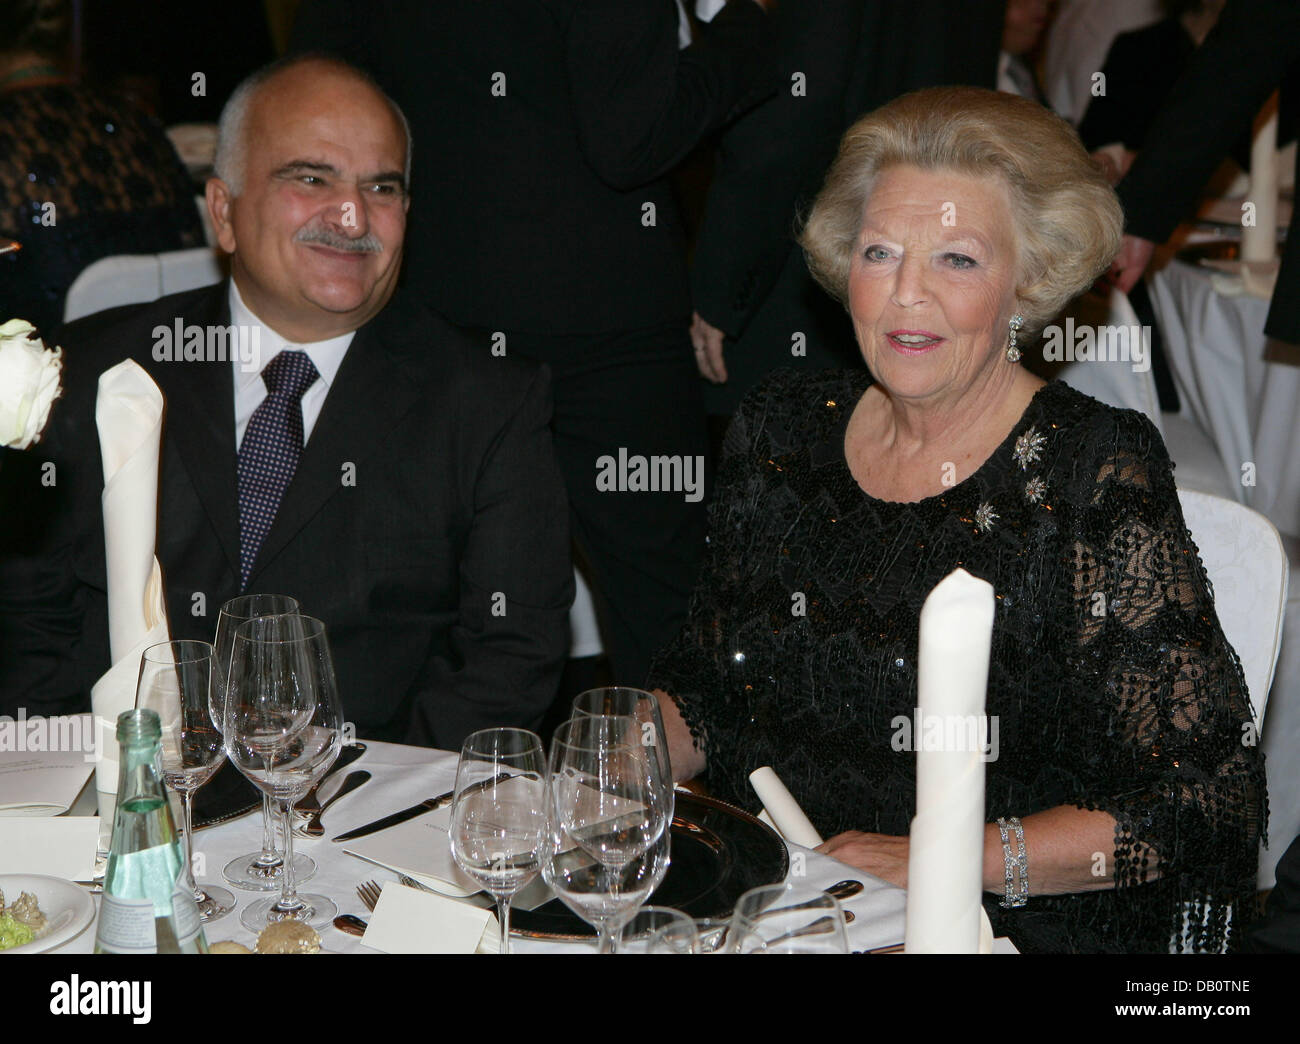 Queen Beatrix of the Netherlands (R) and Prince Hassan of Jordan (L) attend the international gala evening introducing the Centre for European Studies in Berlin, Germany, 24 September 2007. The German Foreign Office invited numerous celebrities to the event that hosted Queen Beatrix as Guest of Honour. Photo: Jens Kalaene Stock Photo